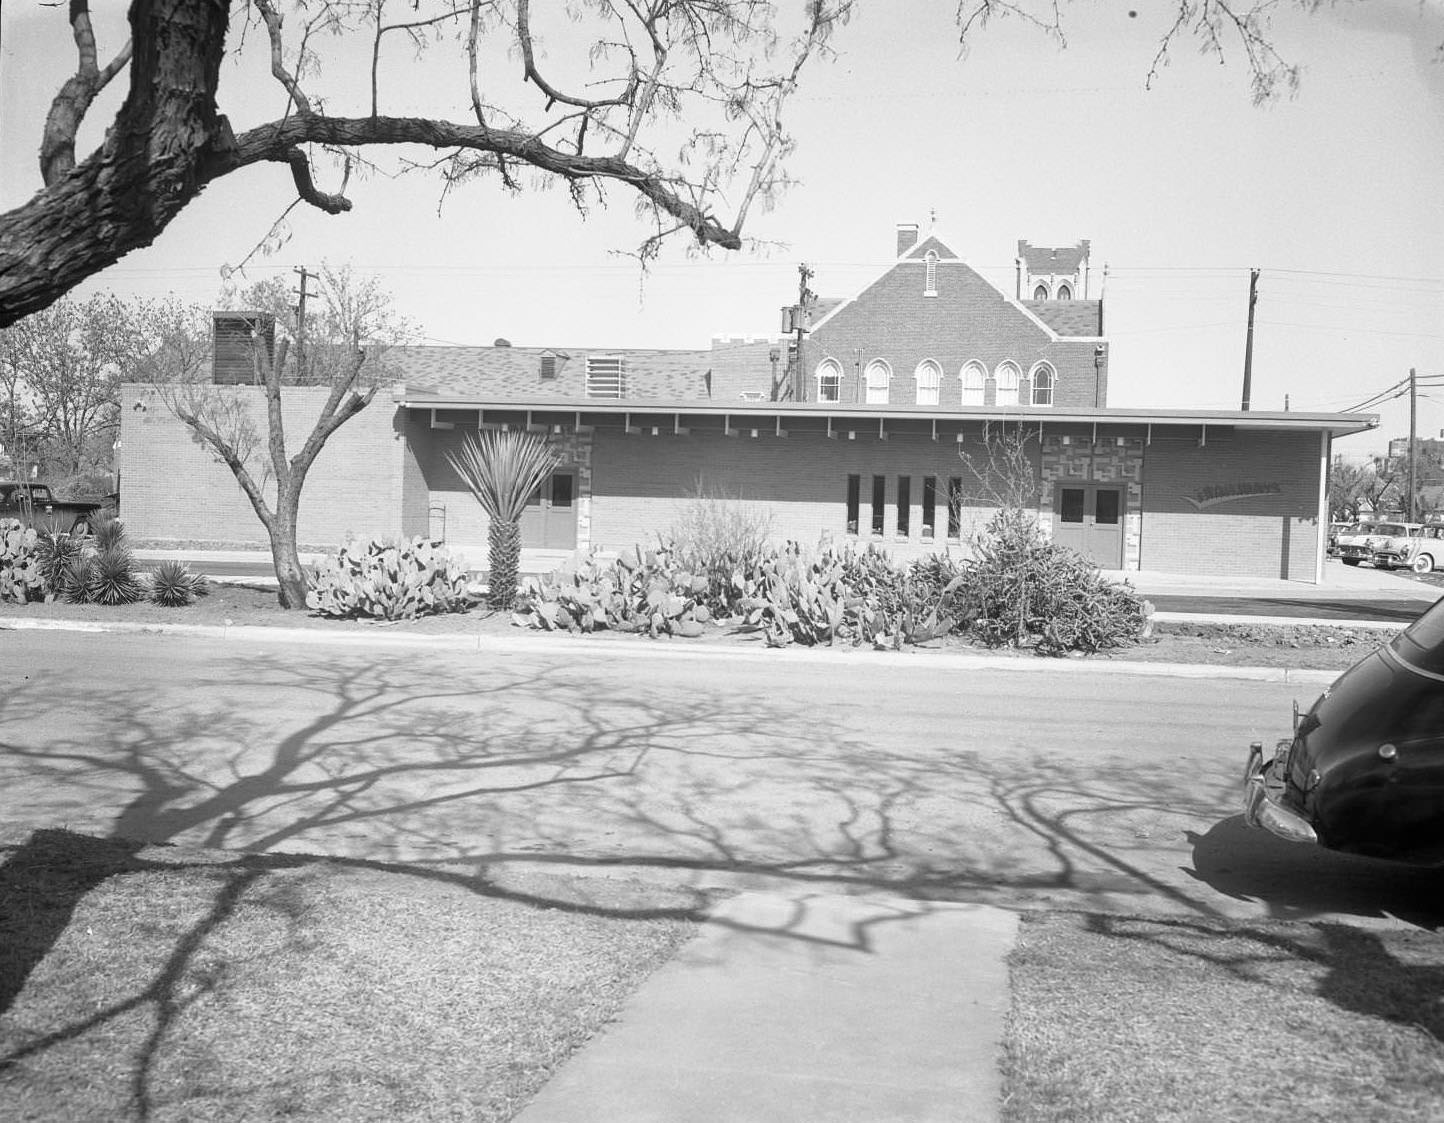 A side view of the exterior of the Trailways building, 1955. There is a garden of cacti and other succulents near the street. In the foreground is the back end of a car.